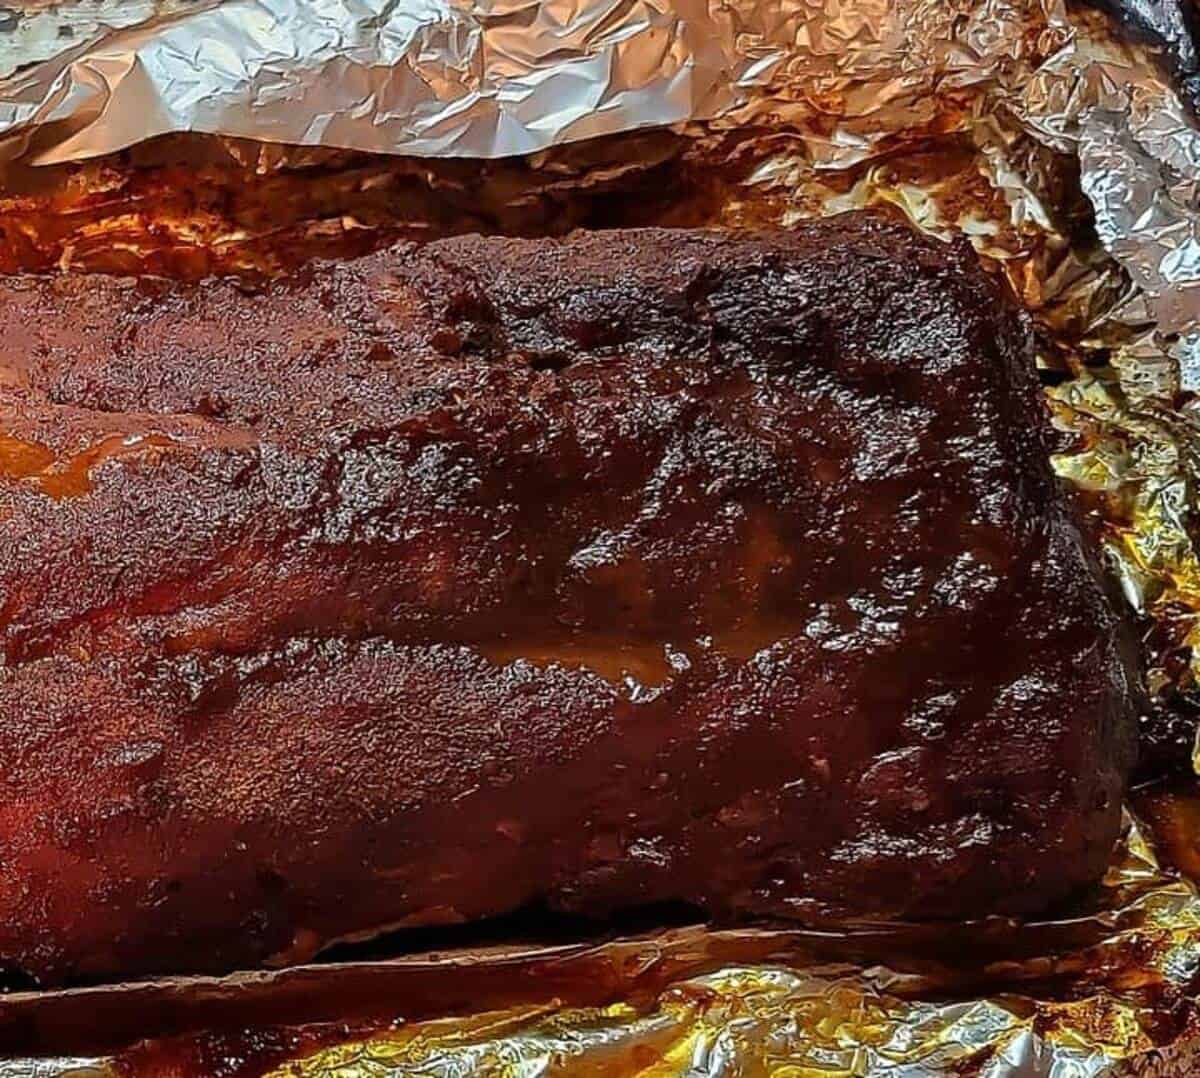 close up of finished rack of ribs, showing dark bronzed bark and juices, in open foil